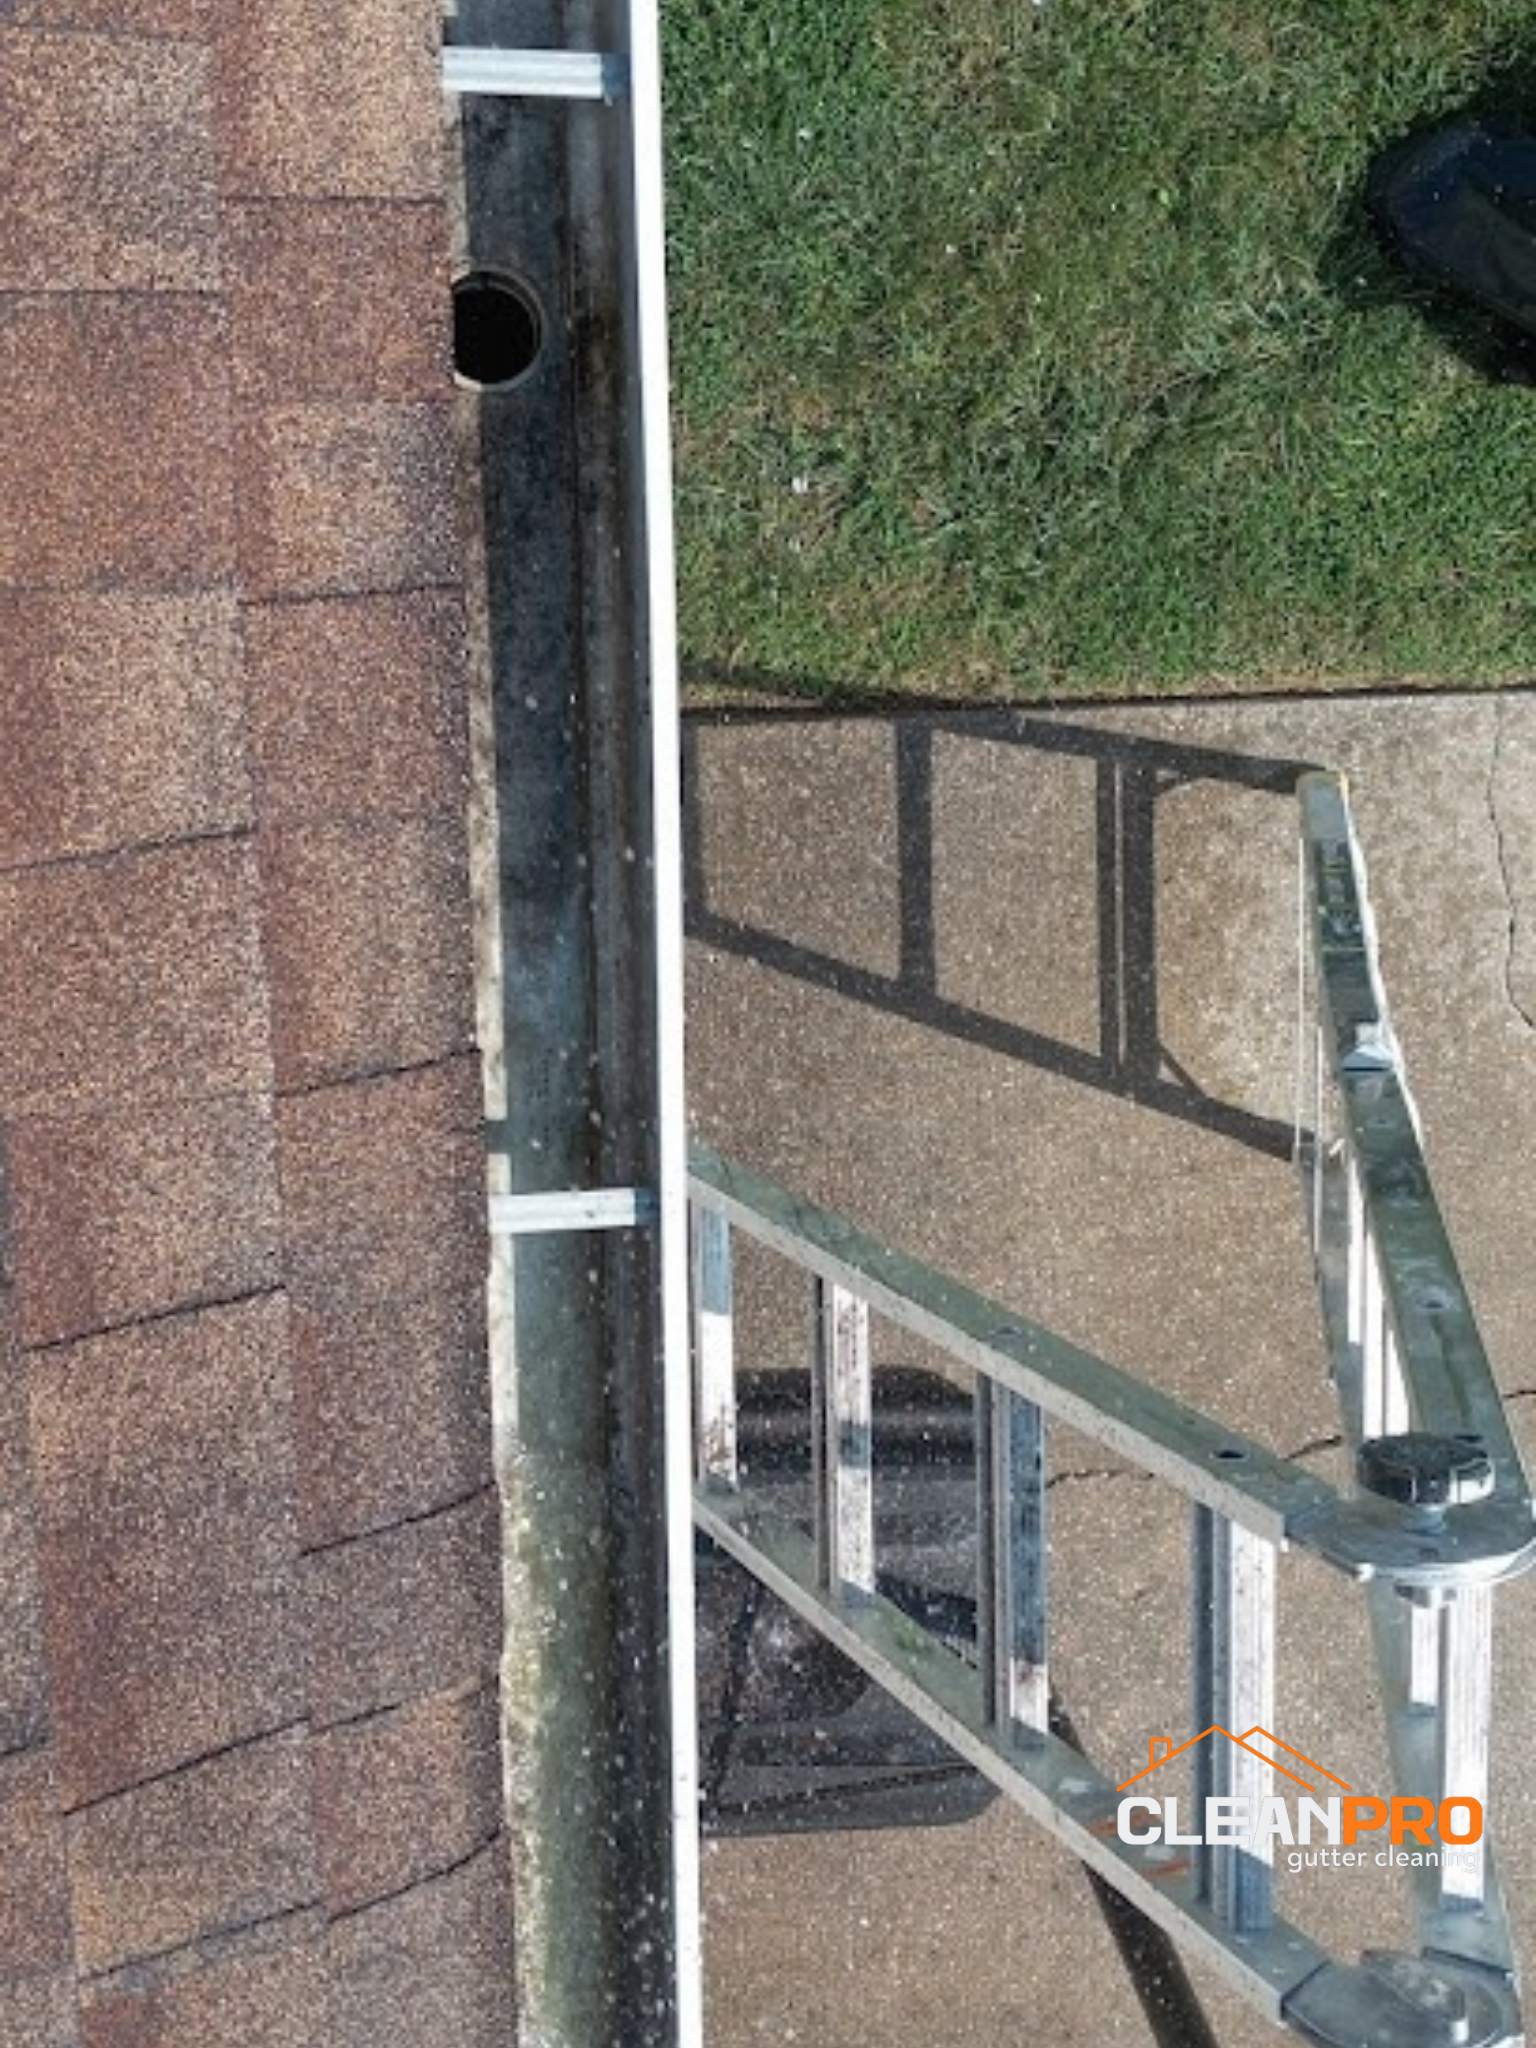 Local Gutter Cleaning in Columbia